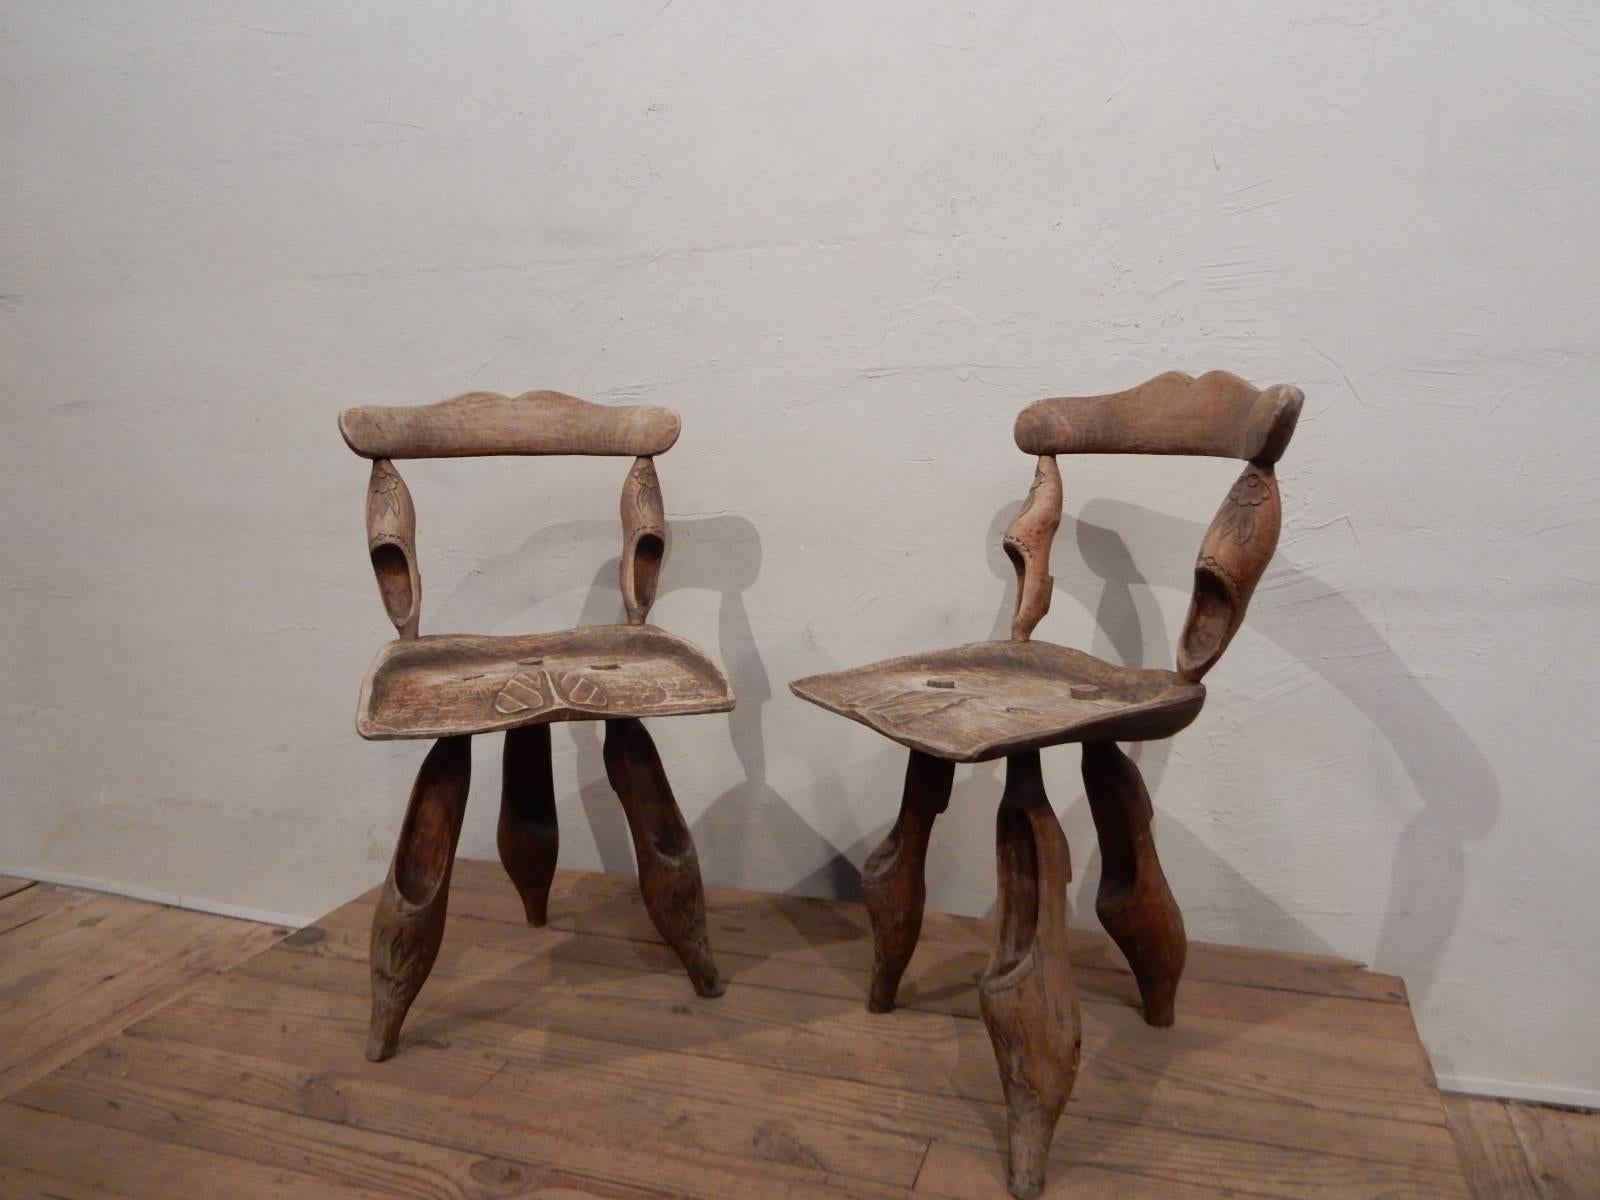 A pair of art populaire chair in massive wood respresenting 